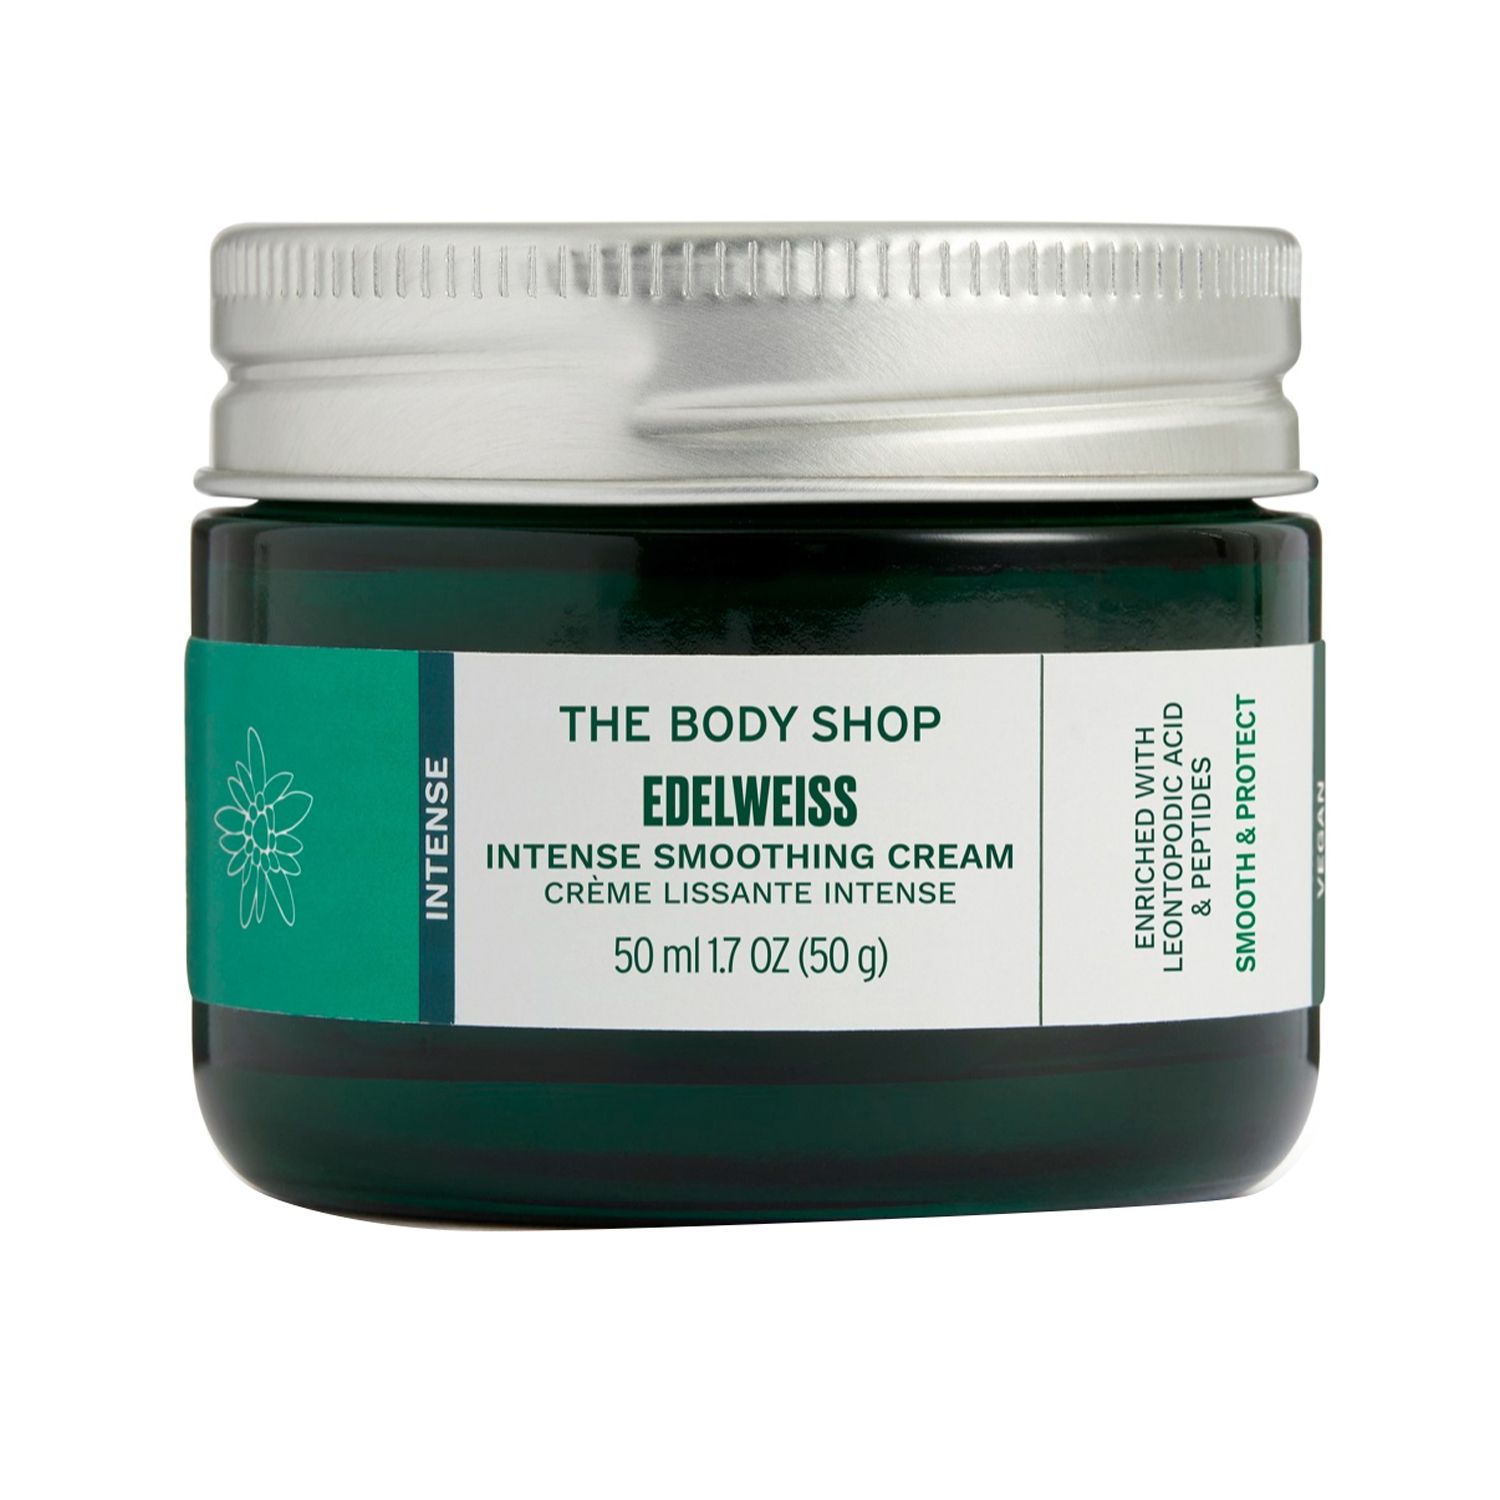 The Body Shop | The Body Shop Edelweiss Intense Smoothing Day Cream (50ml)